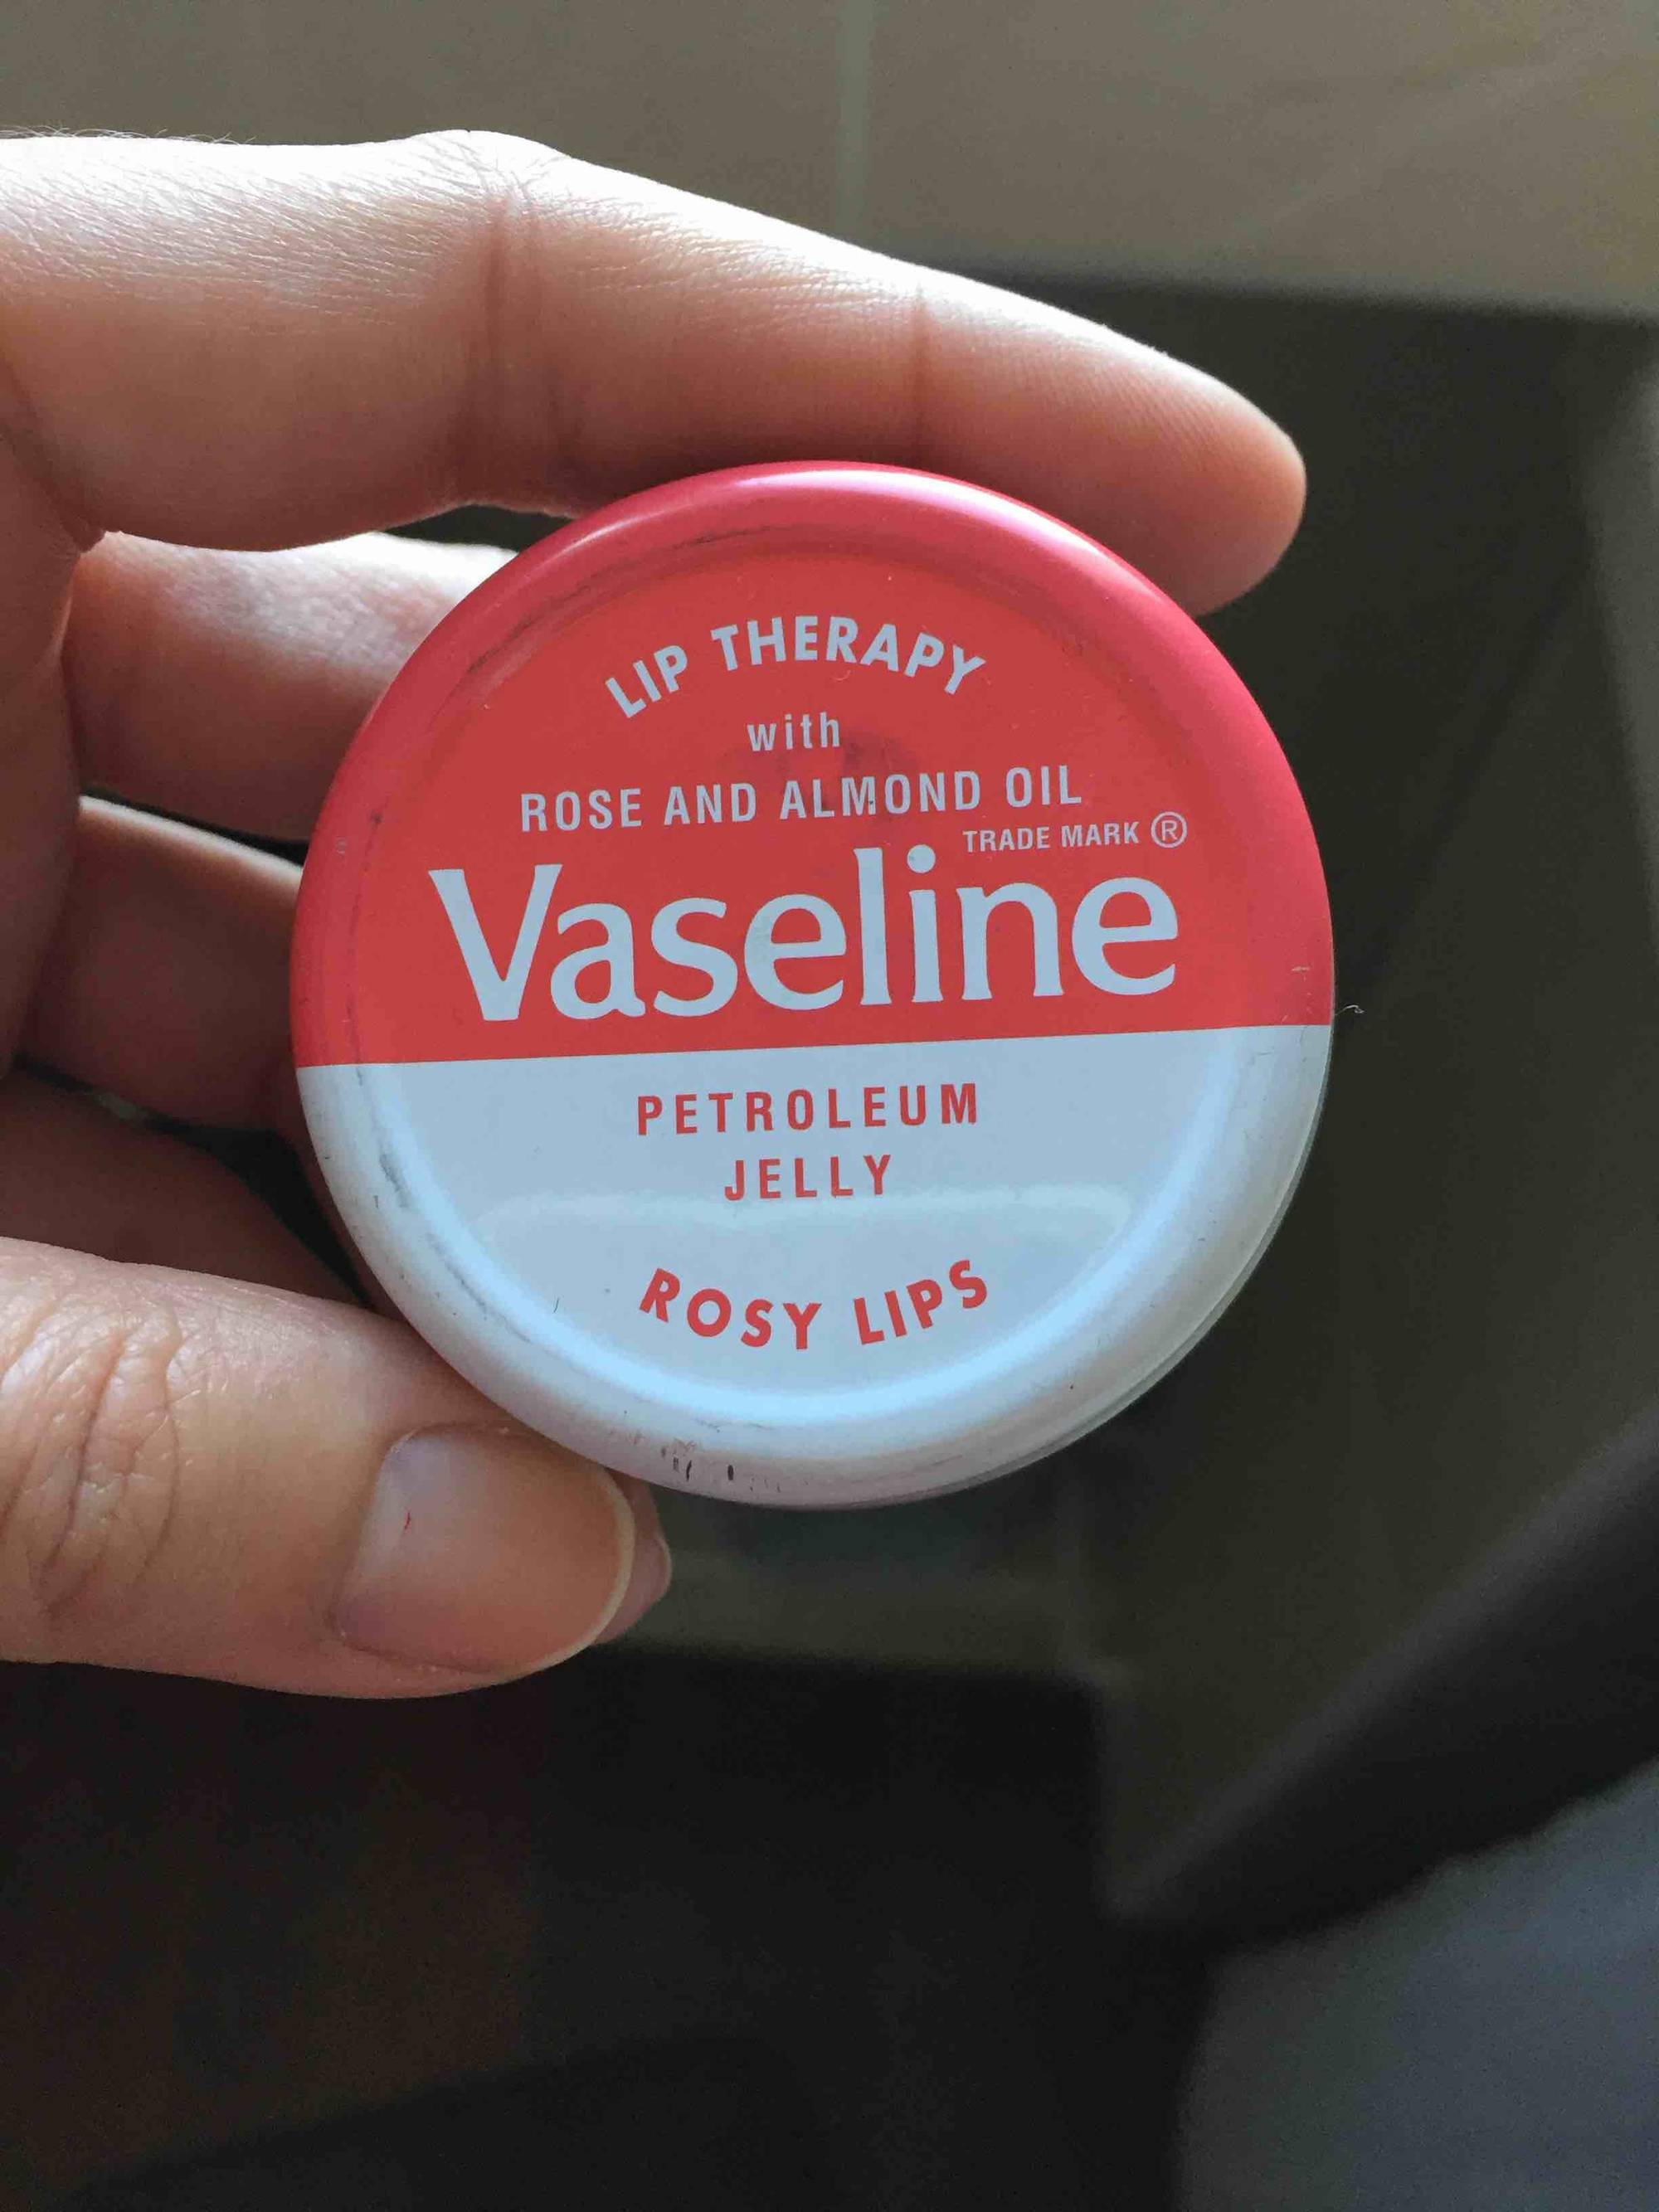 VASELINE - Lip therapy - Rose and almond oil